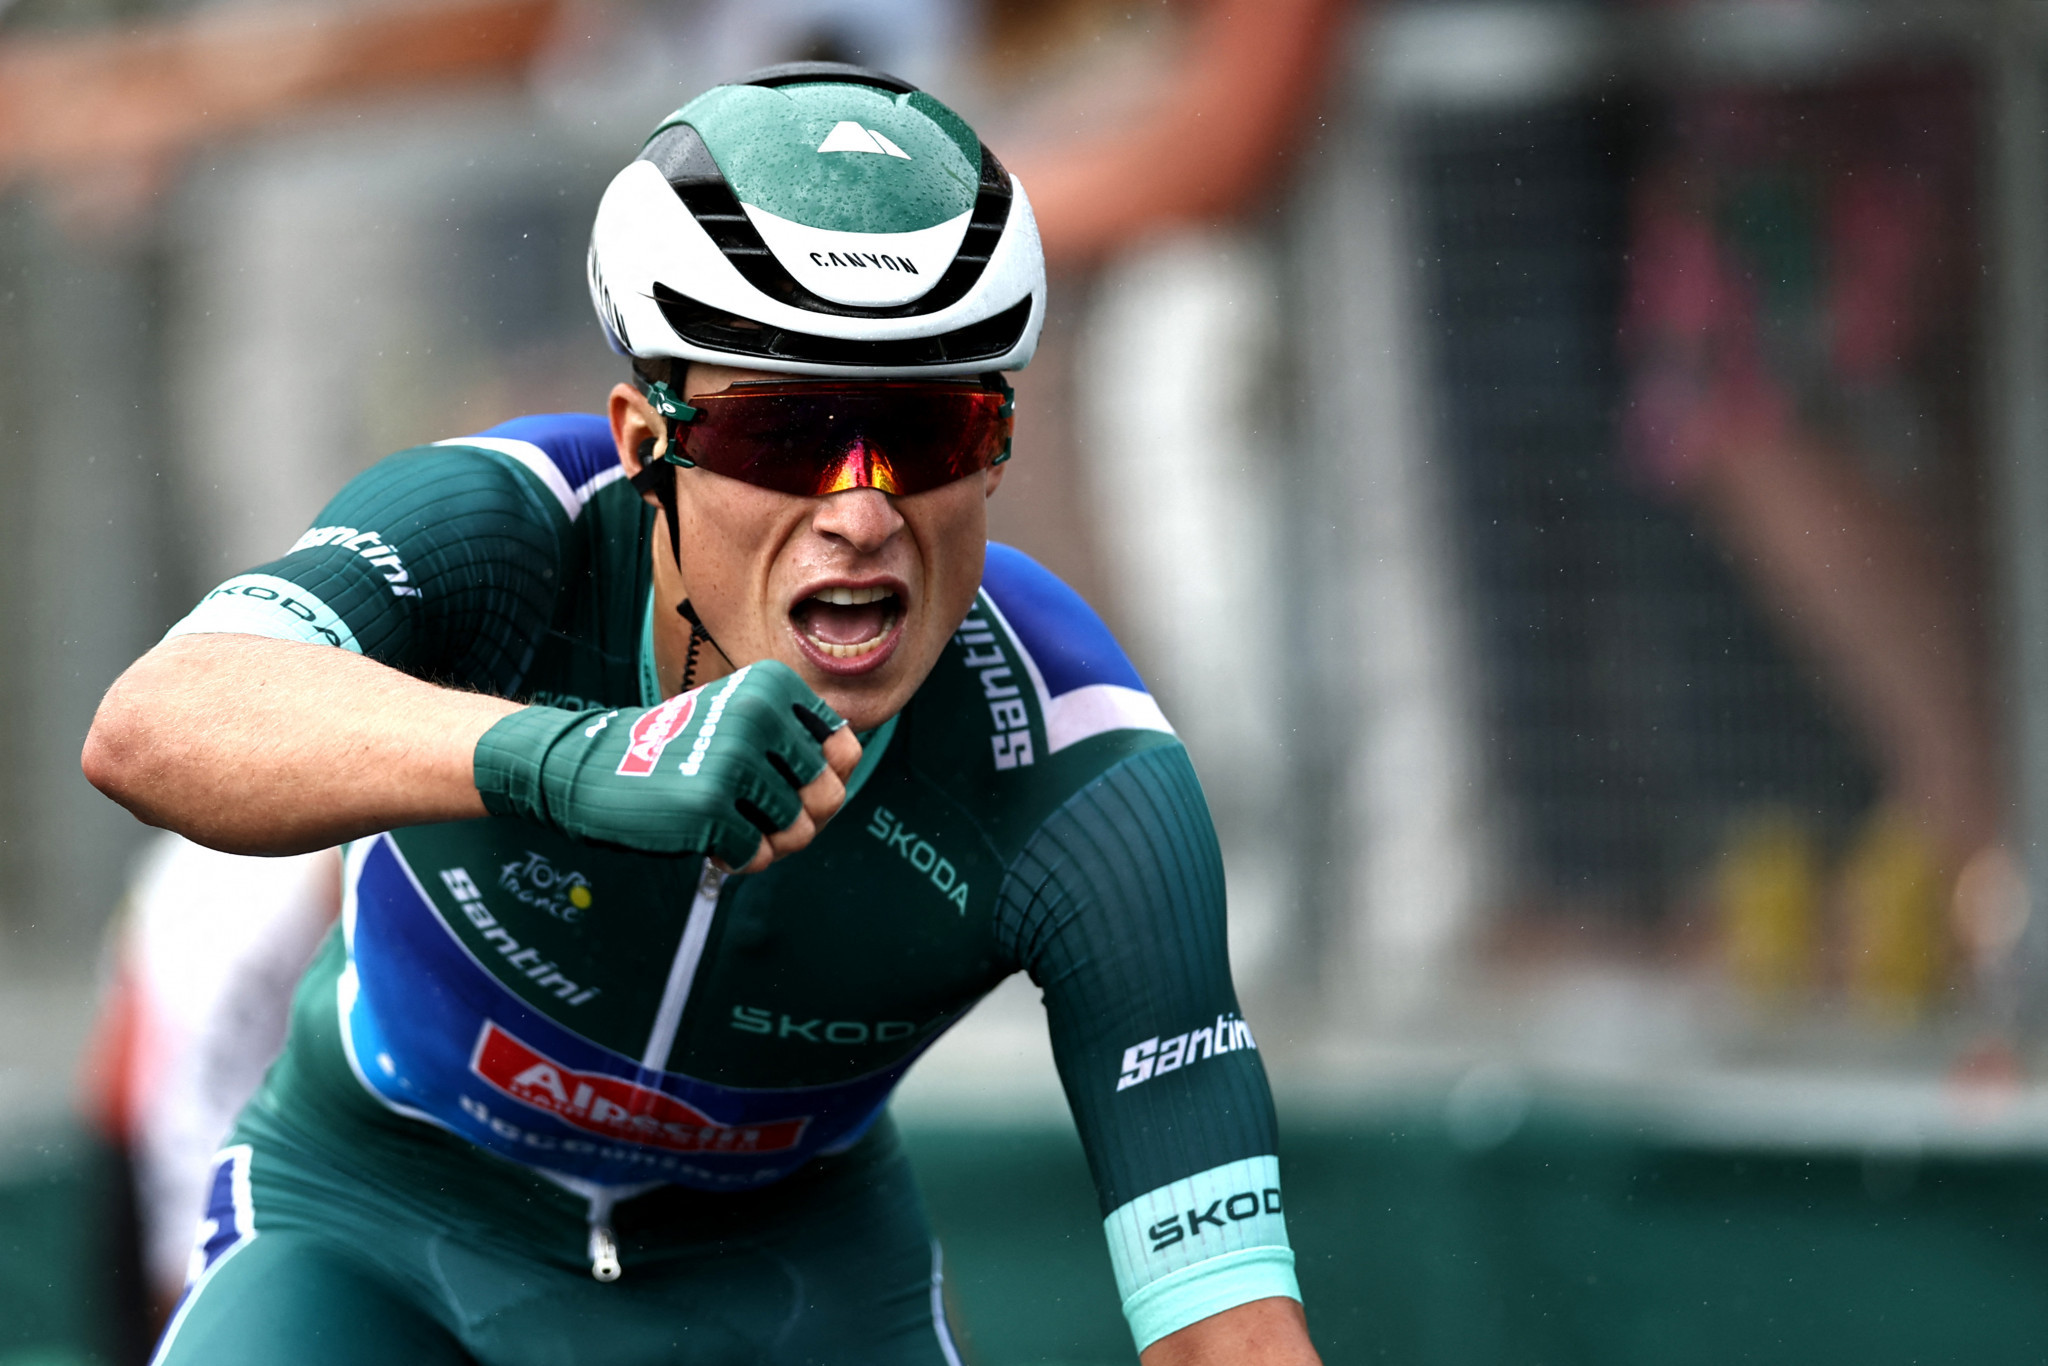 Philipsen sprints to fourth victory of Tour de France on stage 11